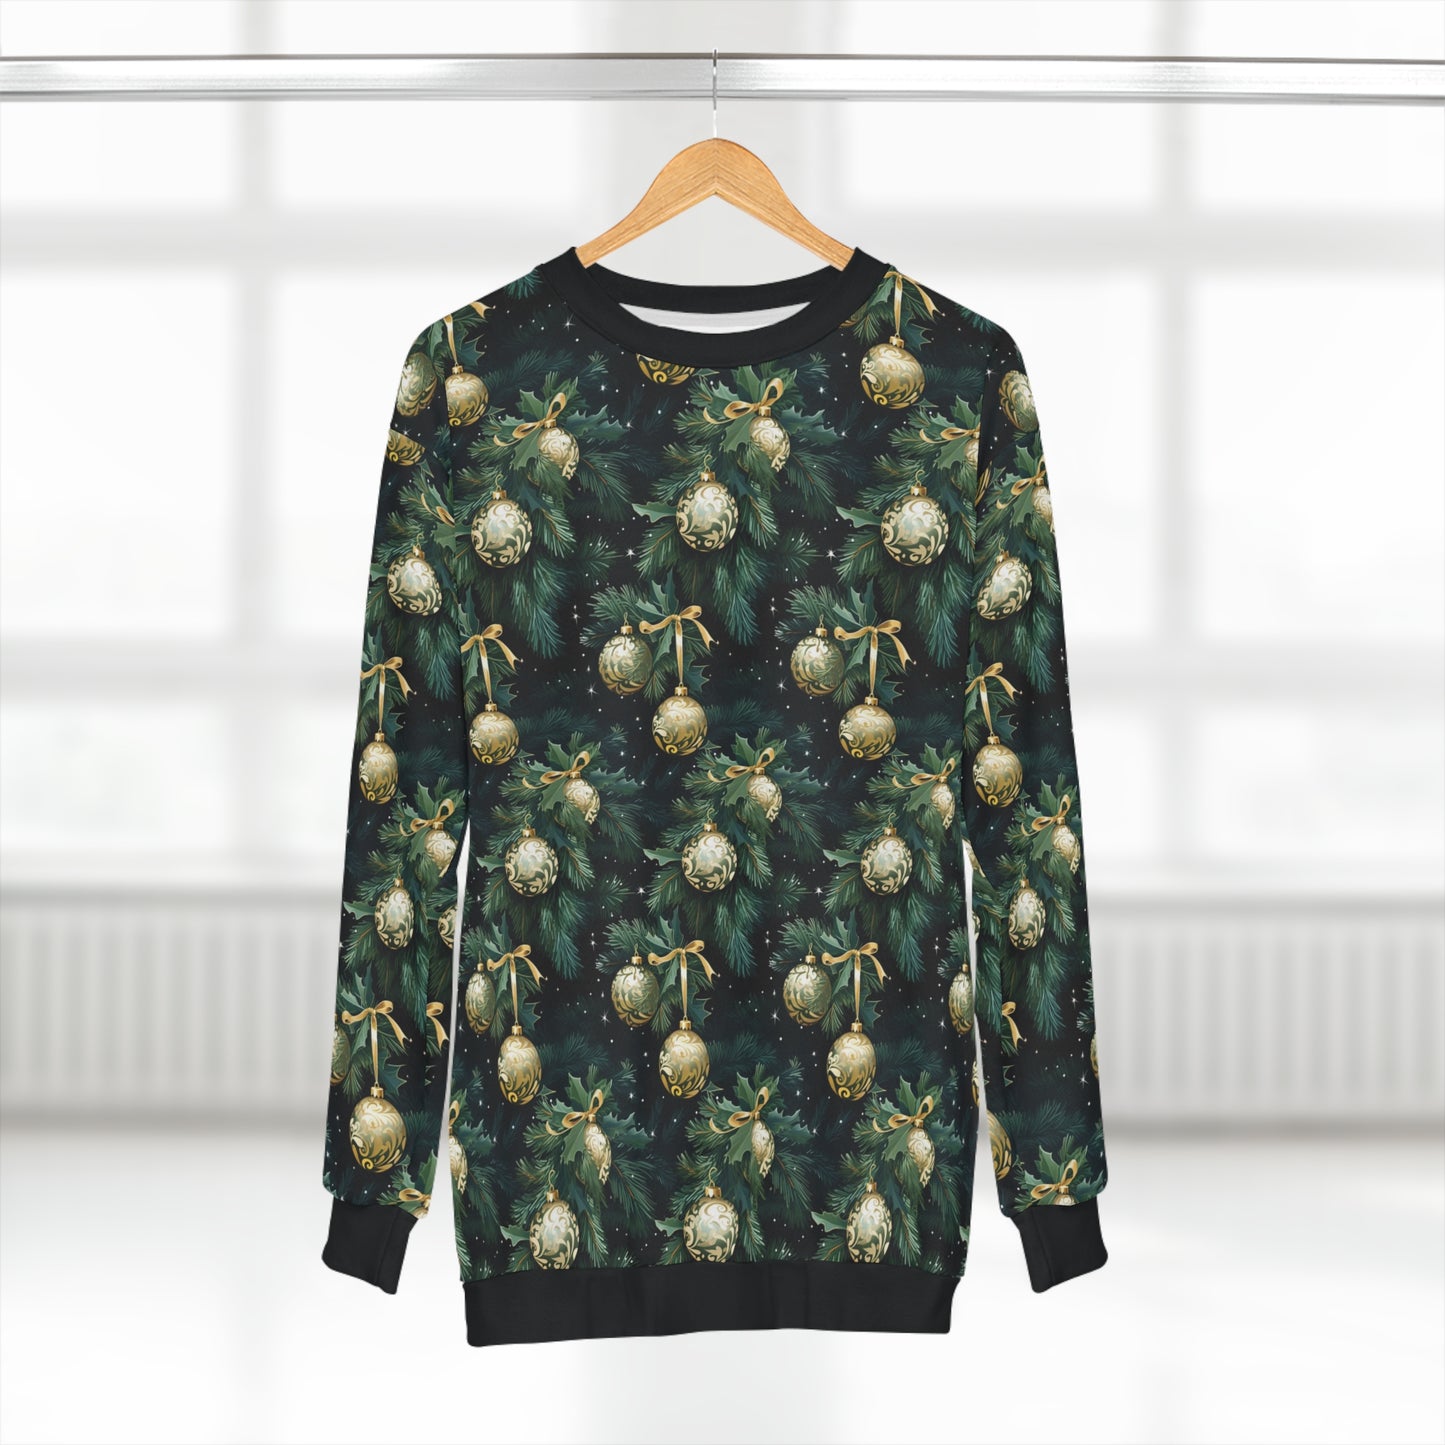 Ugly Christmas Sweater, Green Gold Bad Tacky Xmas Tree Print Women Men Vintage Funny Party Winter Holiday Outfit Sweatshirt Starcove Fashion